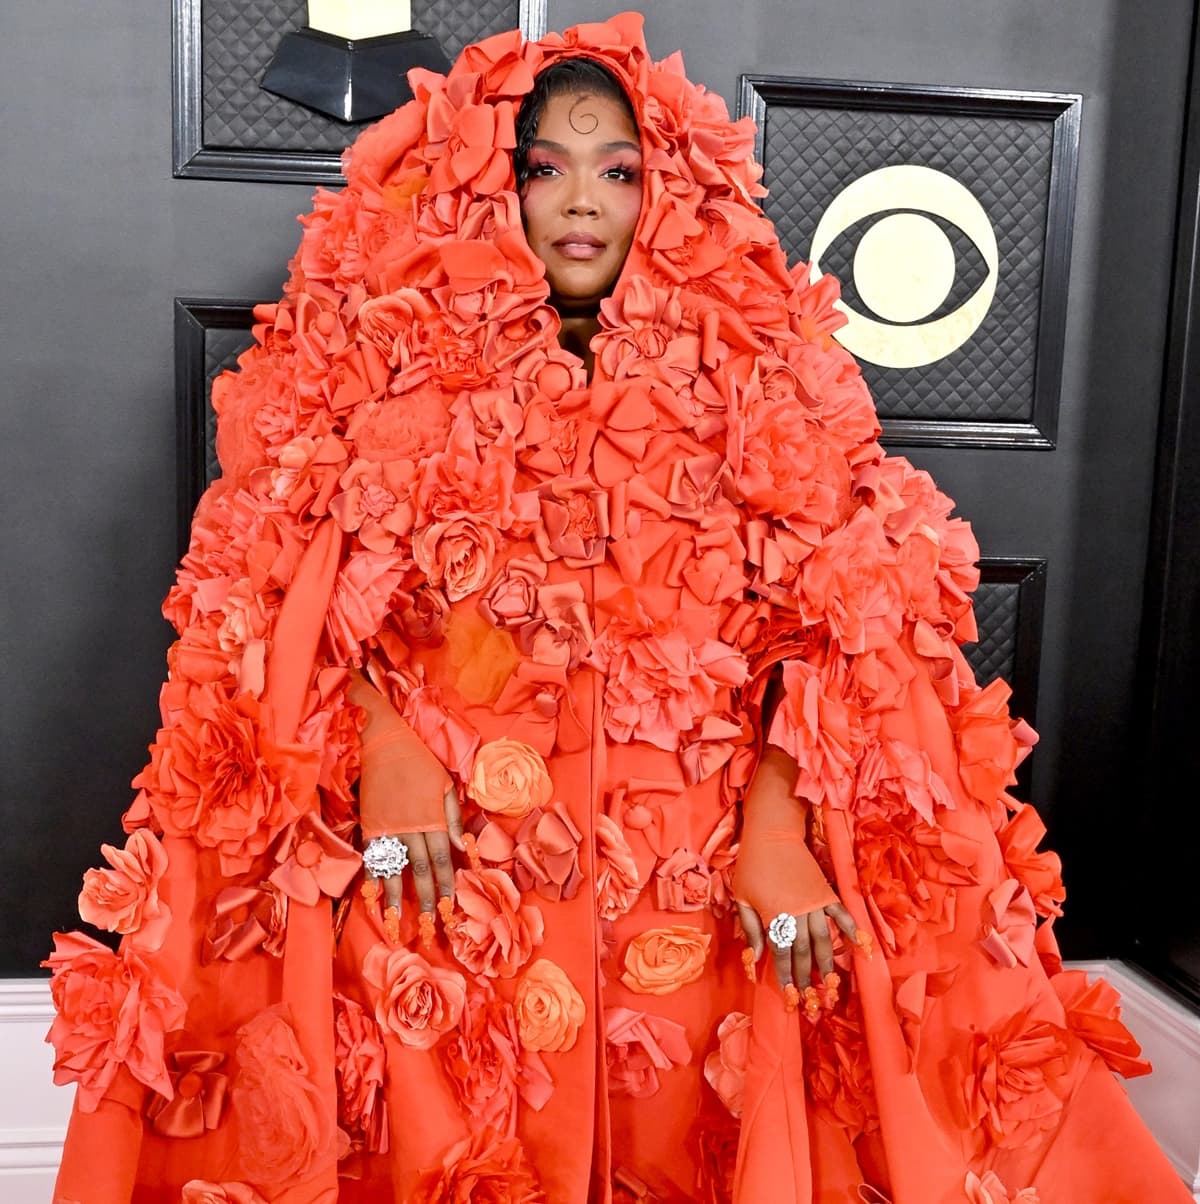 Lizzo made a stunning appearance at the 2023 Grammy Awards in a vibrant orange Dolce & Gabbana gown styled with sheer fingerless gloves and diamond flower-shaped rings, a flower behind her ear, and blood-orange eyeshadow